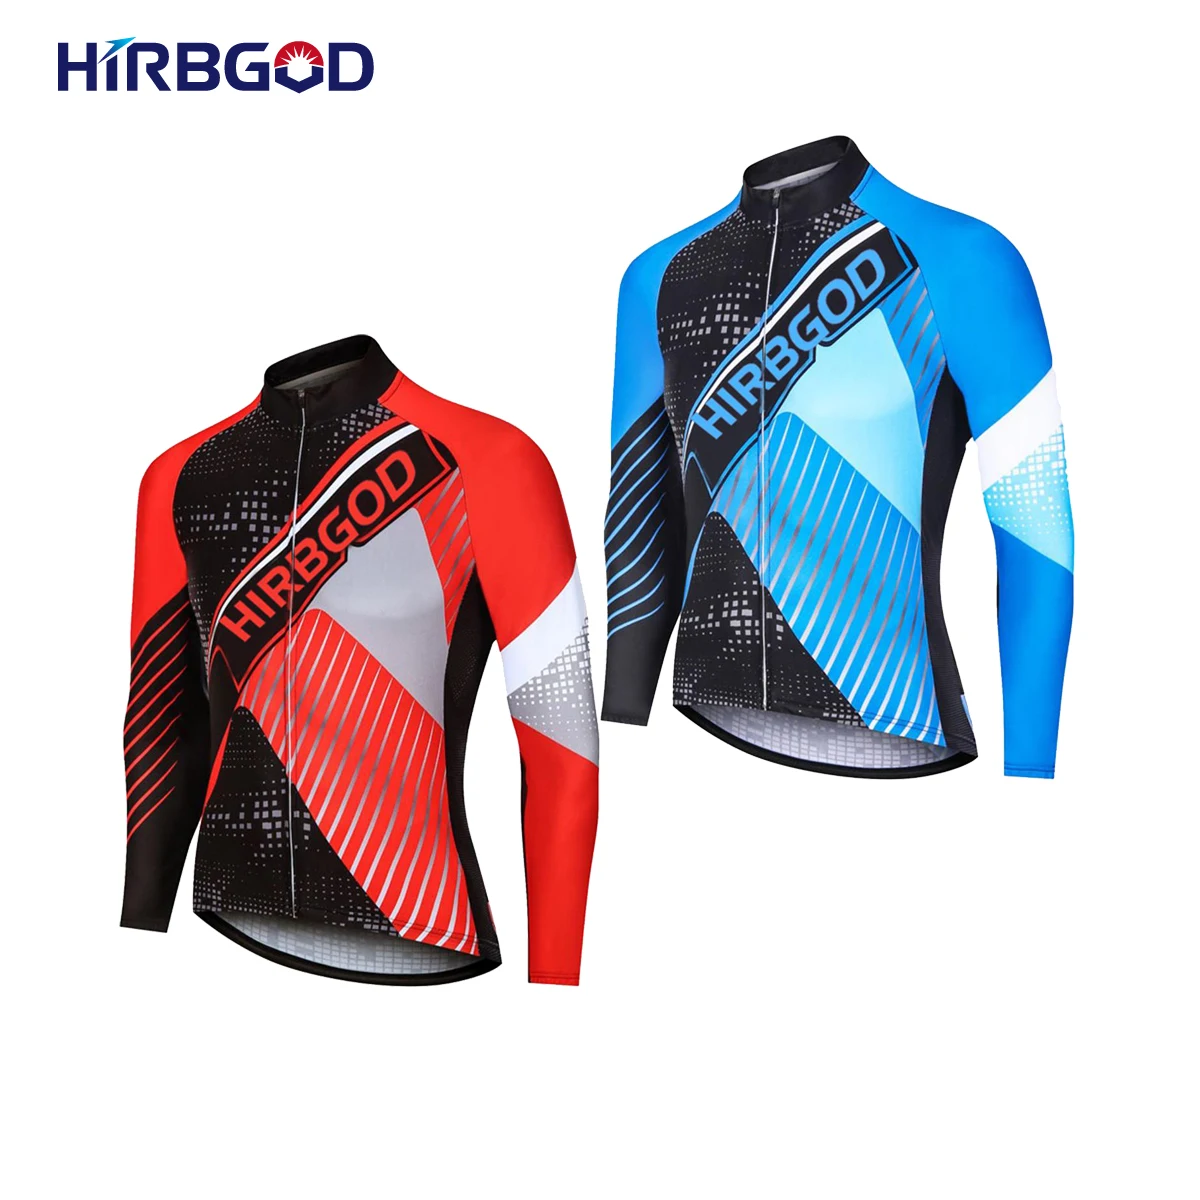 

HIRBGOD The New Men's Comfortable Bike Tops With Reflective Effect Cycling Jersey Long Sleeves MTB Jersey Ropa Ciclismo Hombre